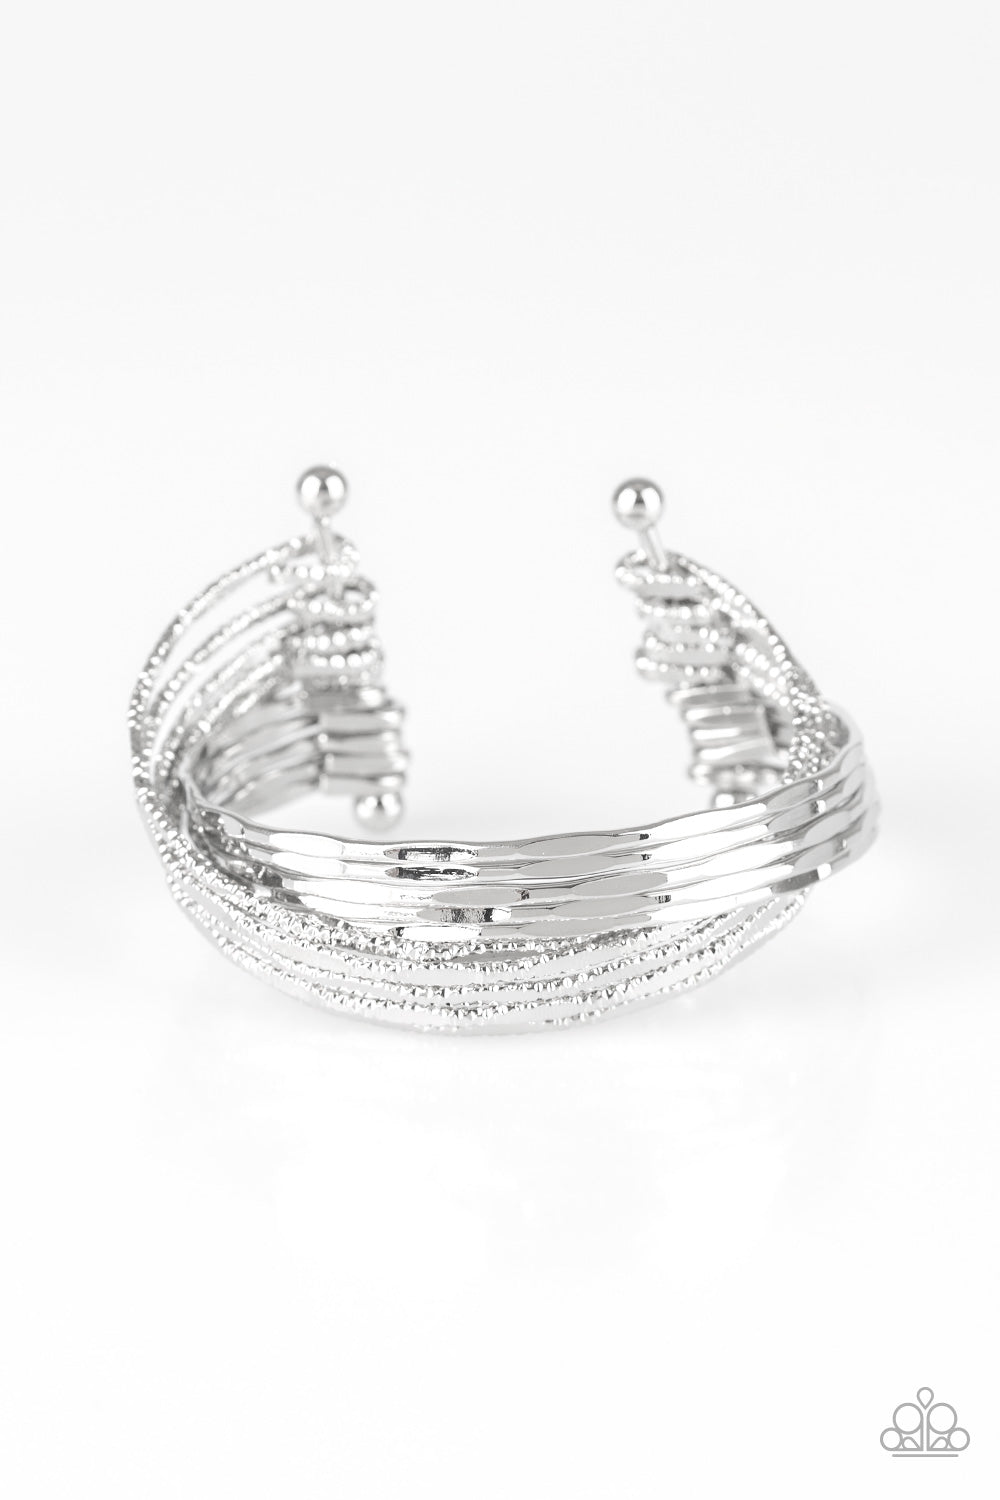 See A Pattern? - Silver Bracelet - Paparazzi Accessories